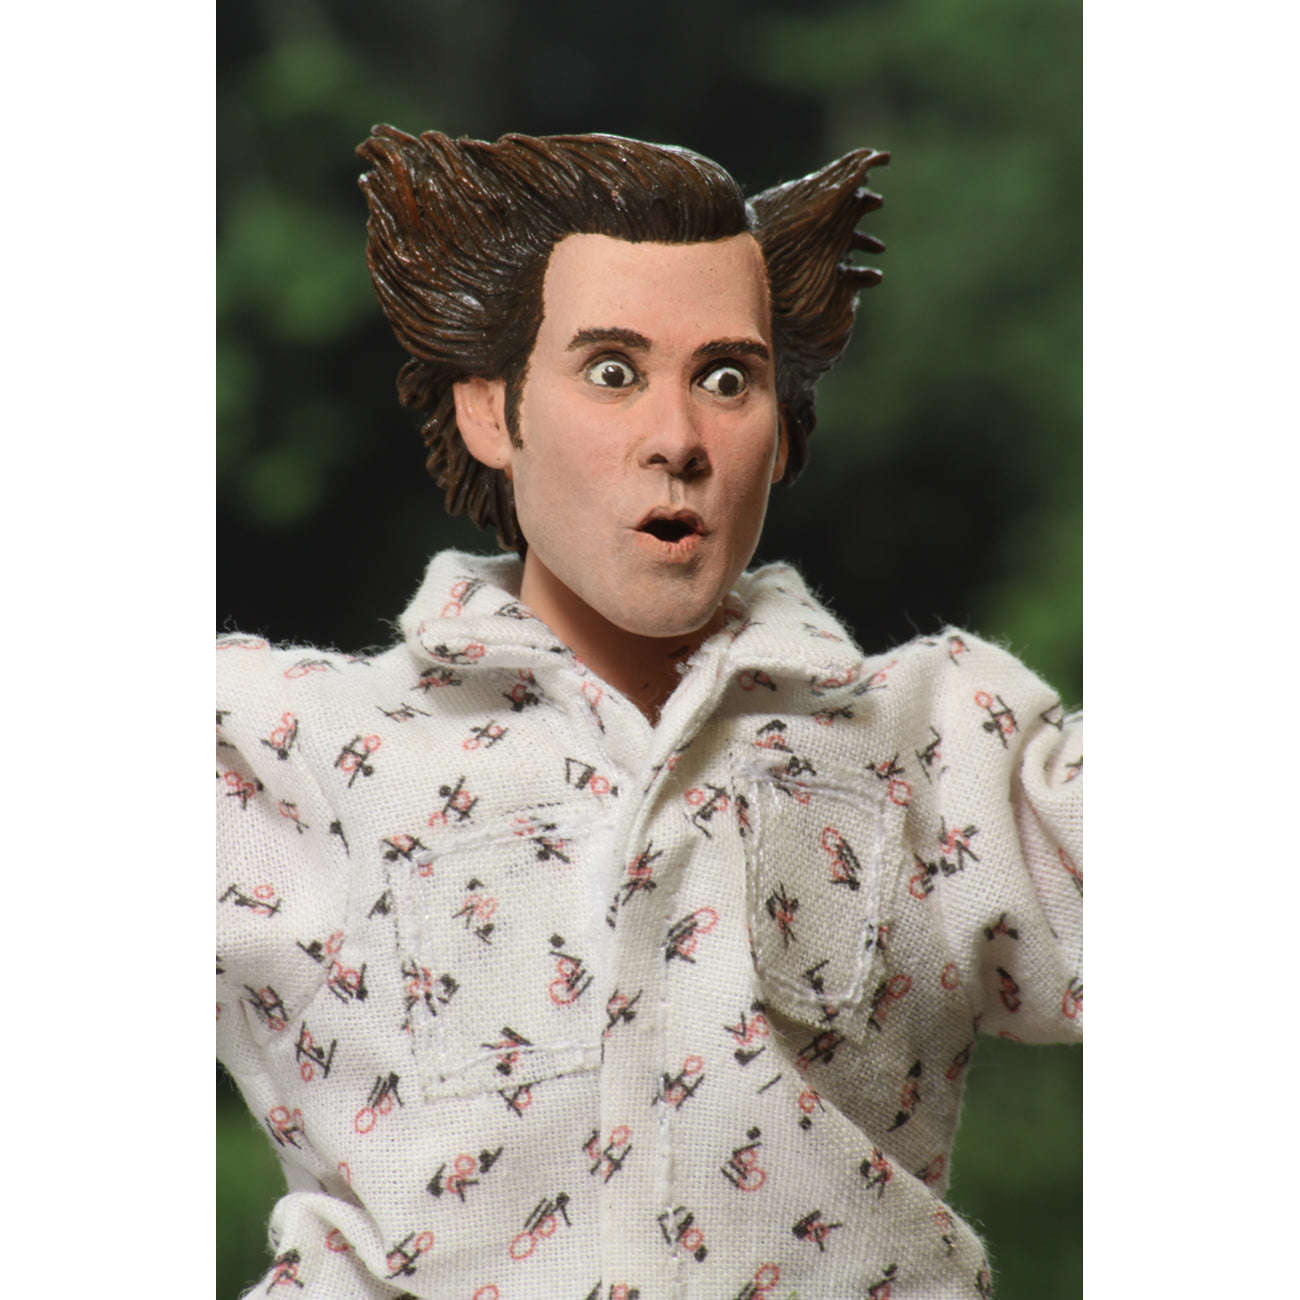 Ace Ventura – 8″ Clothed Action Figure – Shady Acres Ace Ventura Collectible